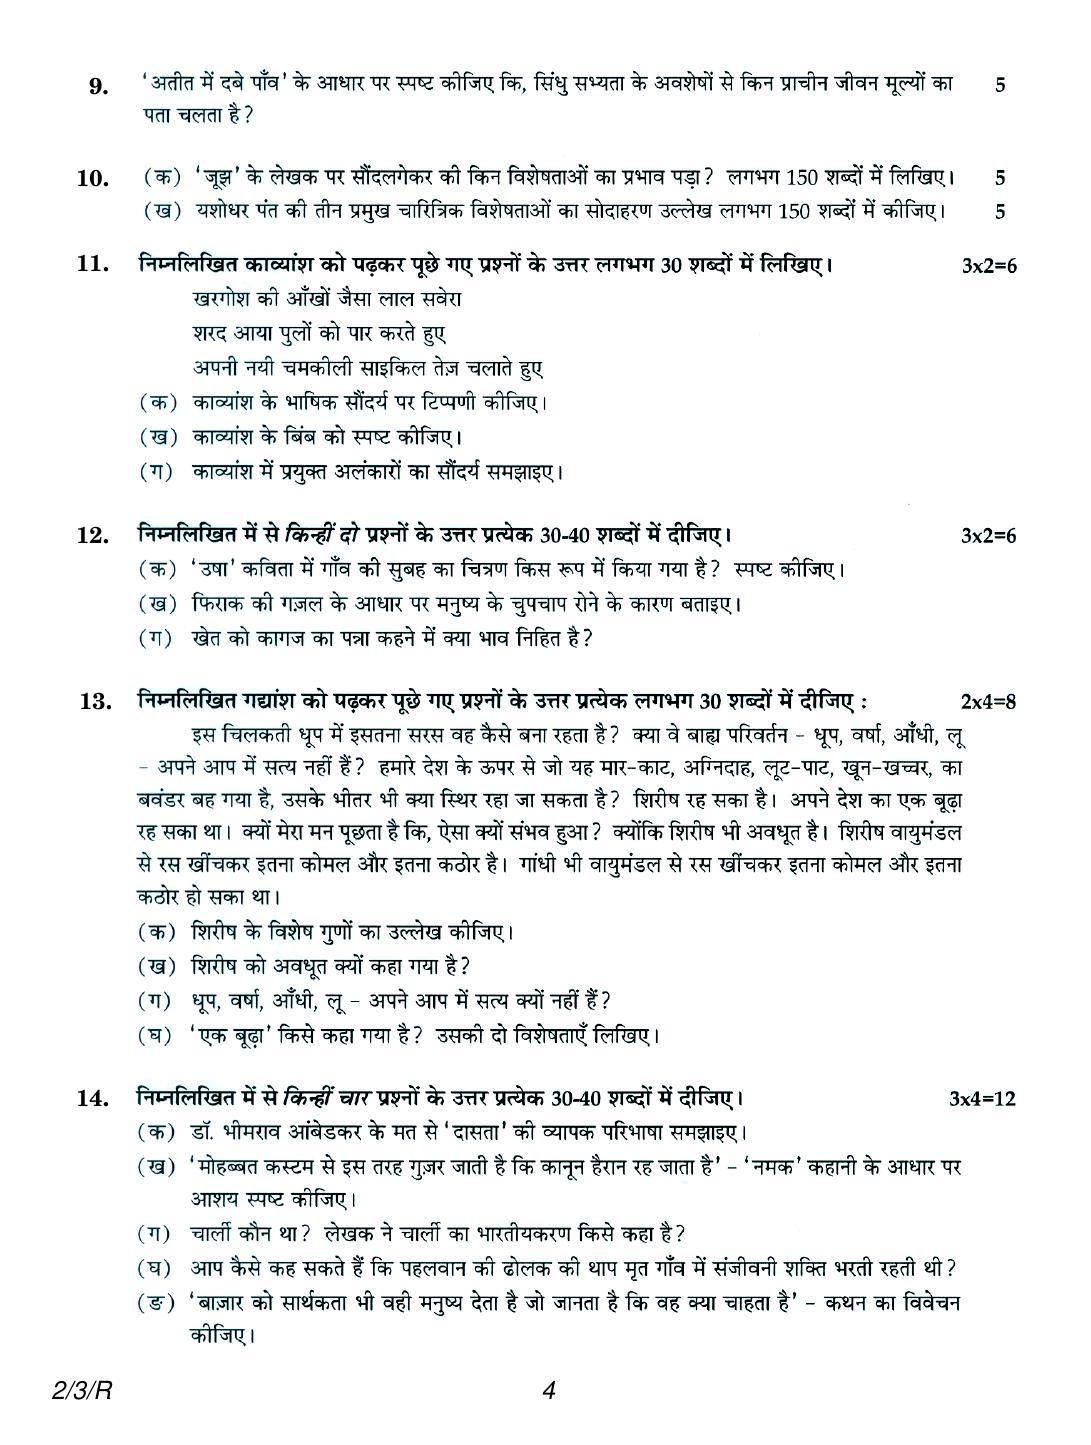 CBSE Class 12 2-3R HINDI CORE (SGN) 2018 Question Paper - Page 4